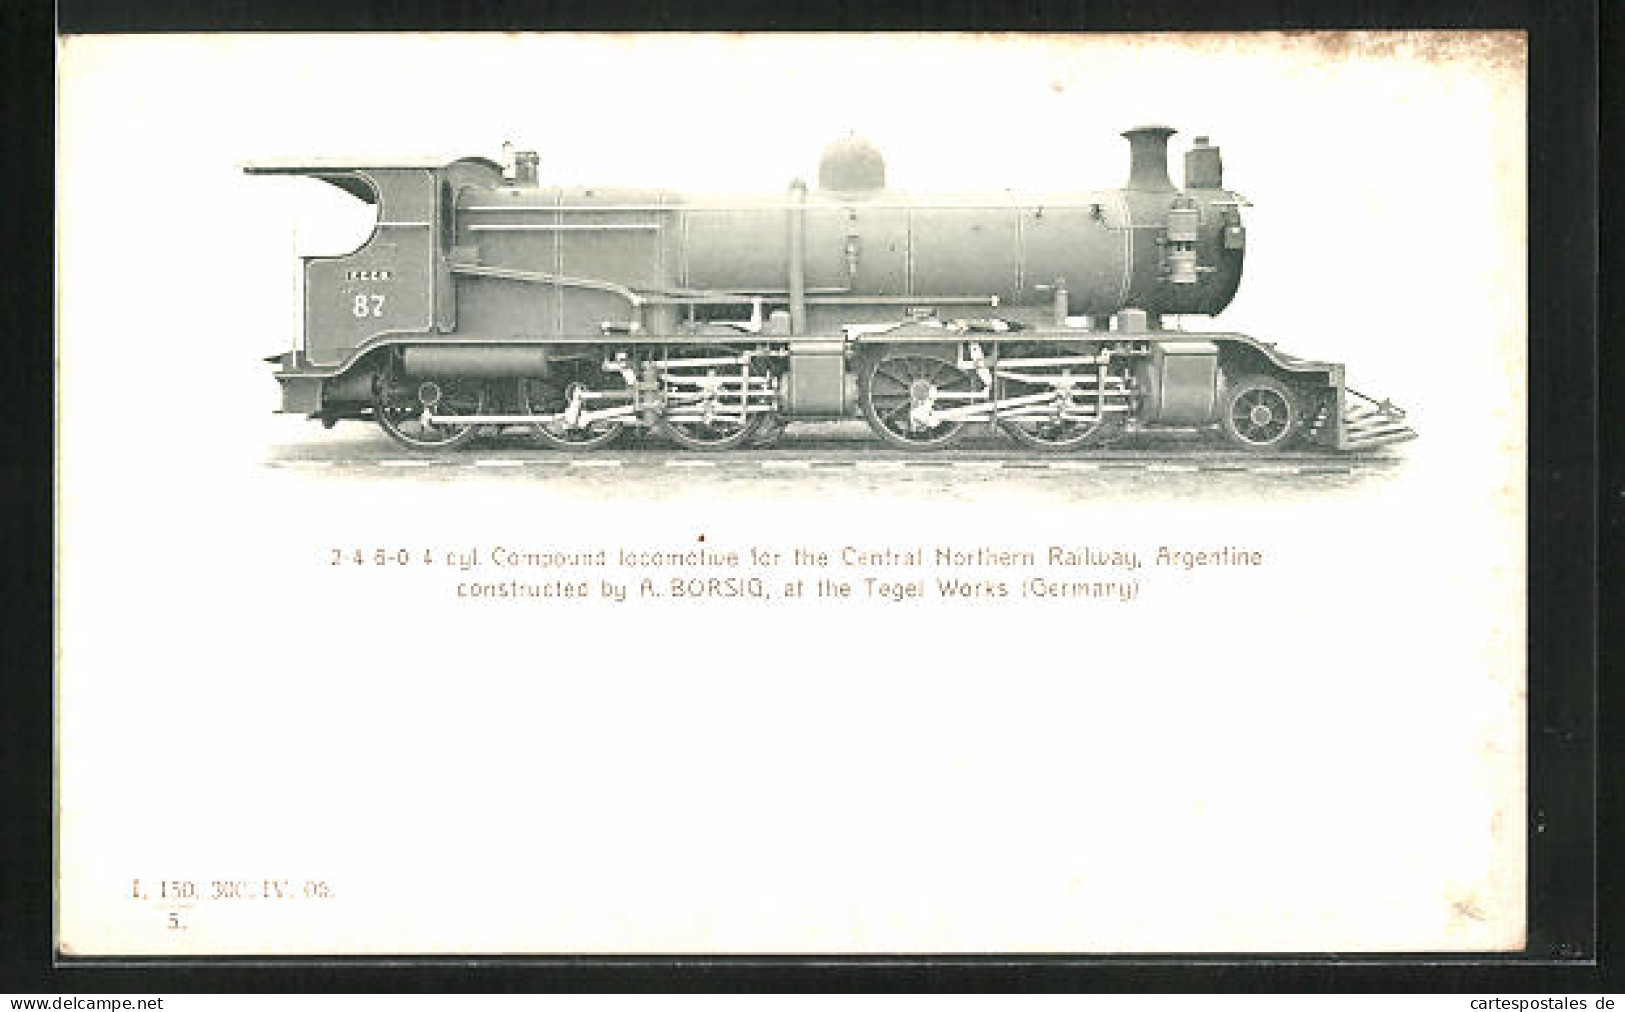 AK Berlin-Tege, 2-4-6-0 4 Cyl. Compound Locomotive For The Central Northern Railway, Argentine, Constructed By A. Bors  - Eisenbahnen